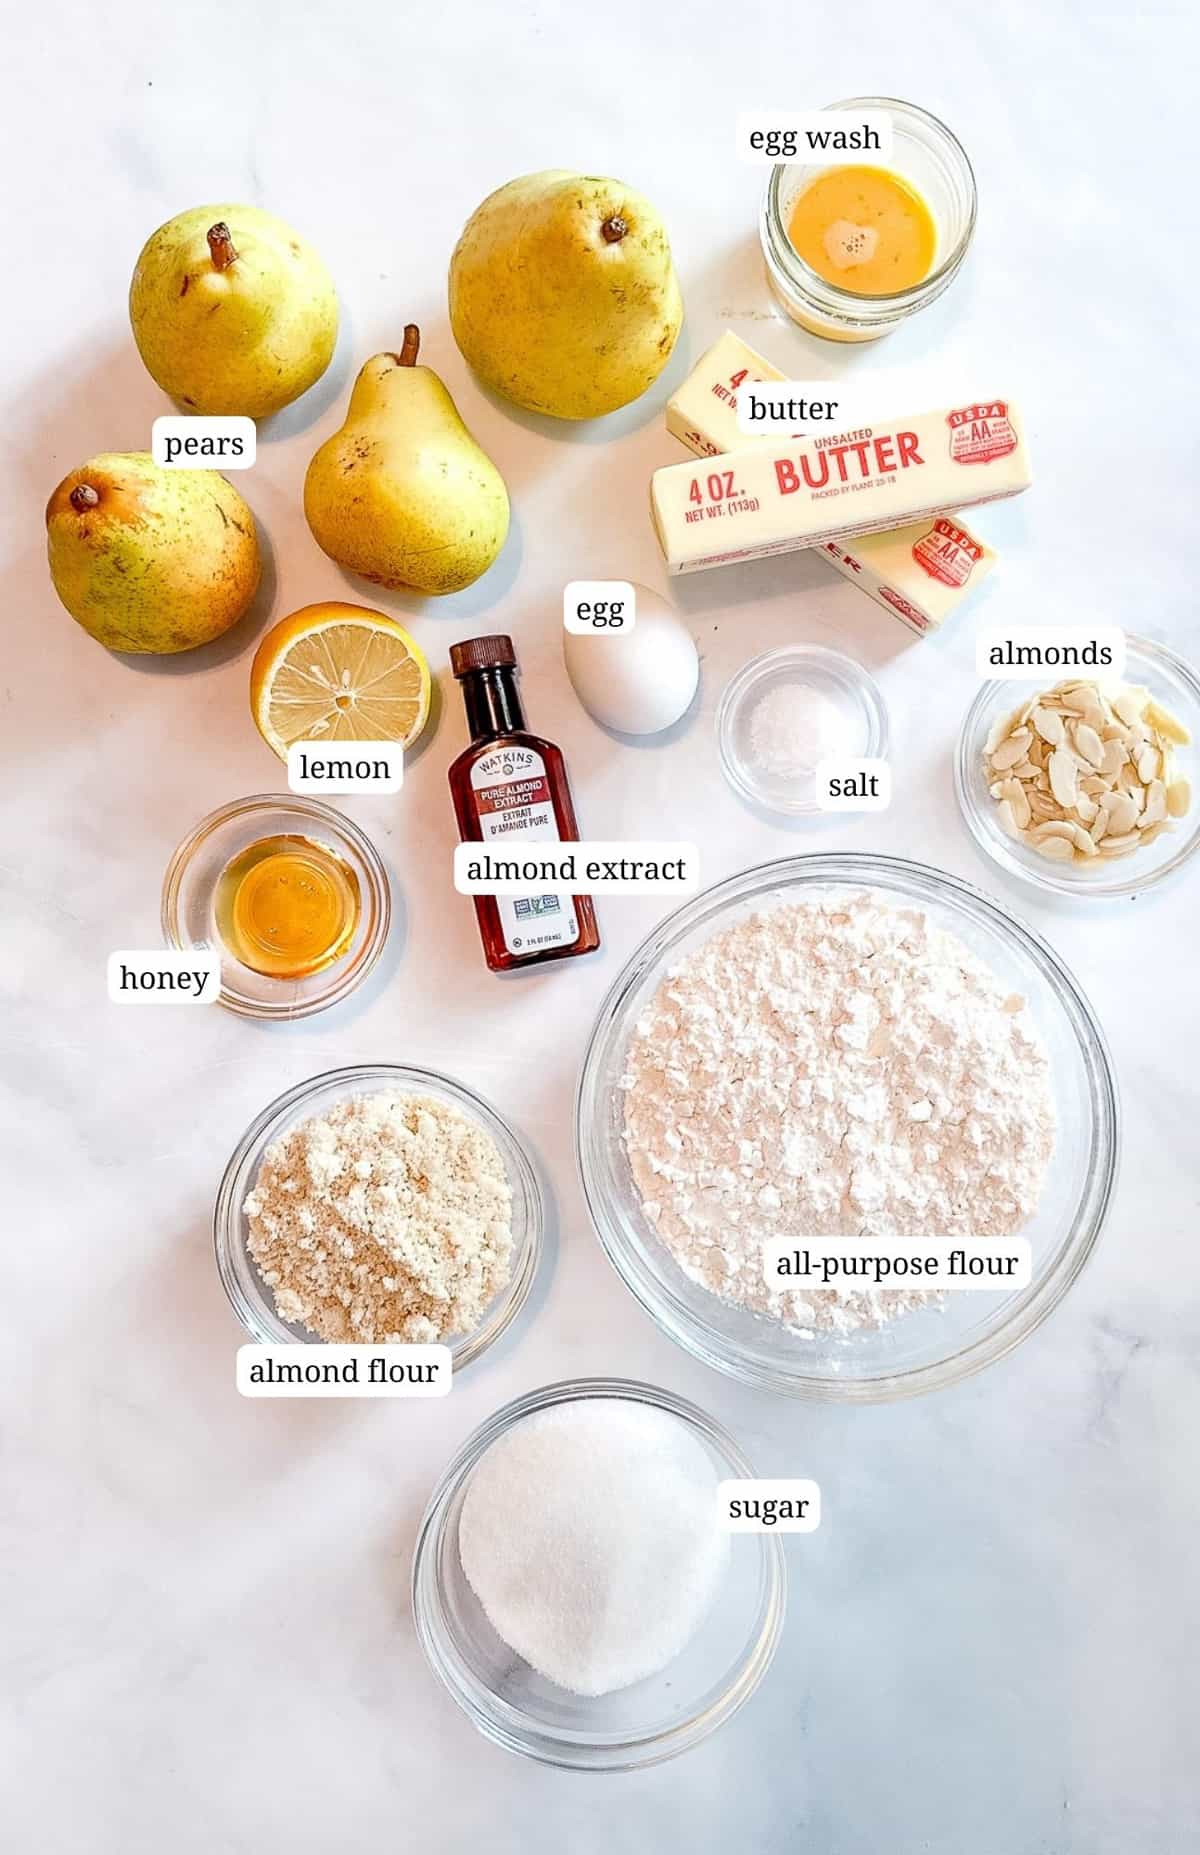 Labeled image of ingredients for pear frangipane galette.